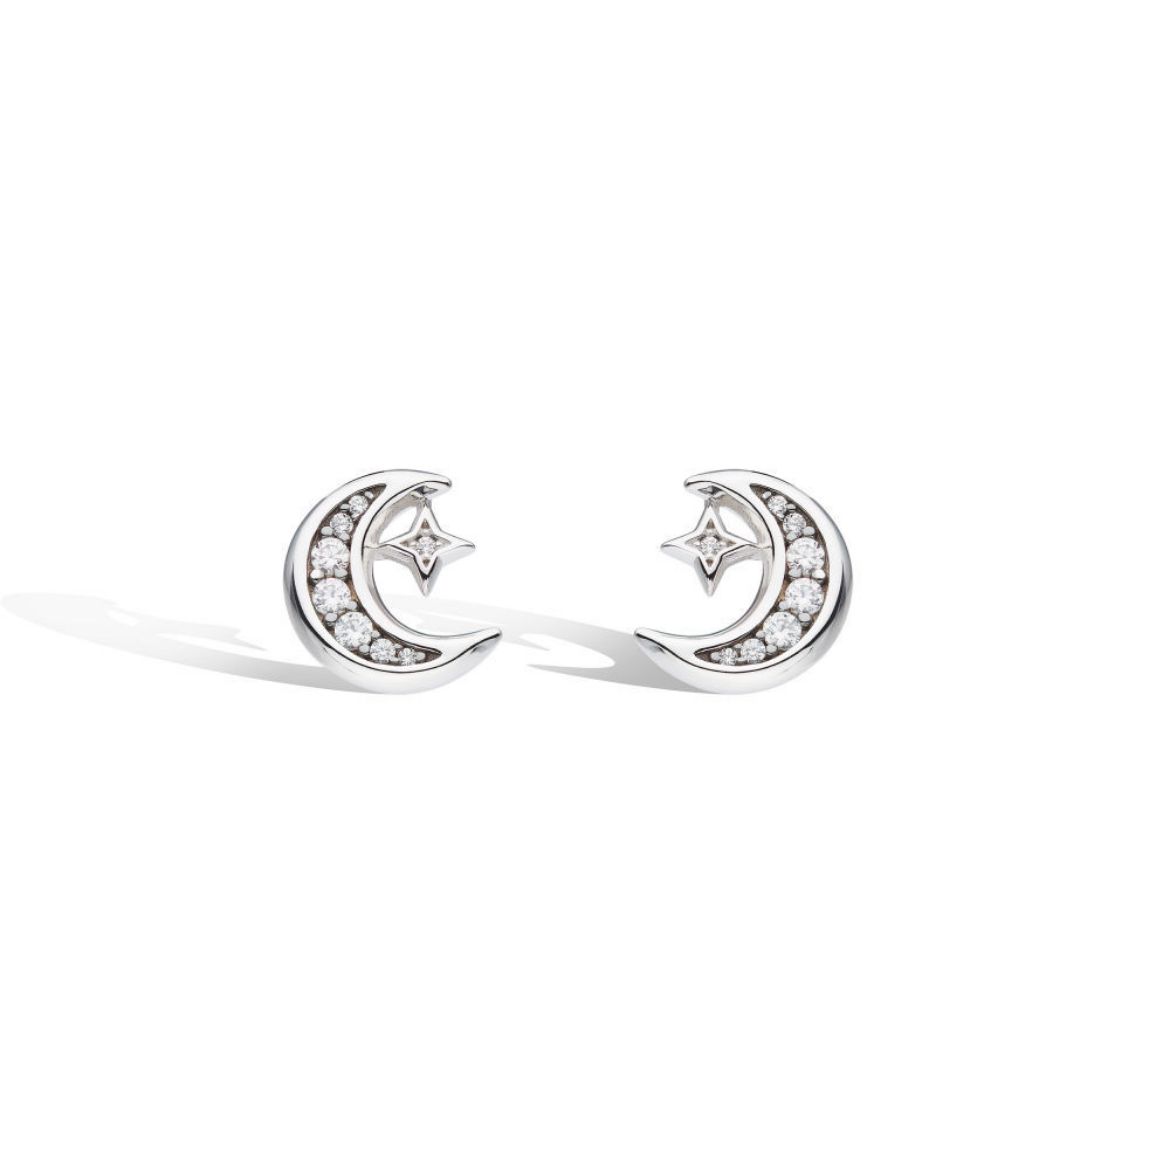 Picture of Revival Céleste Small Crescent Moon Stud Earrings